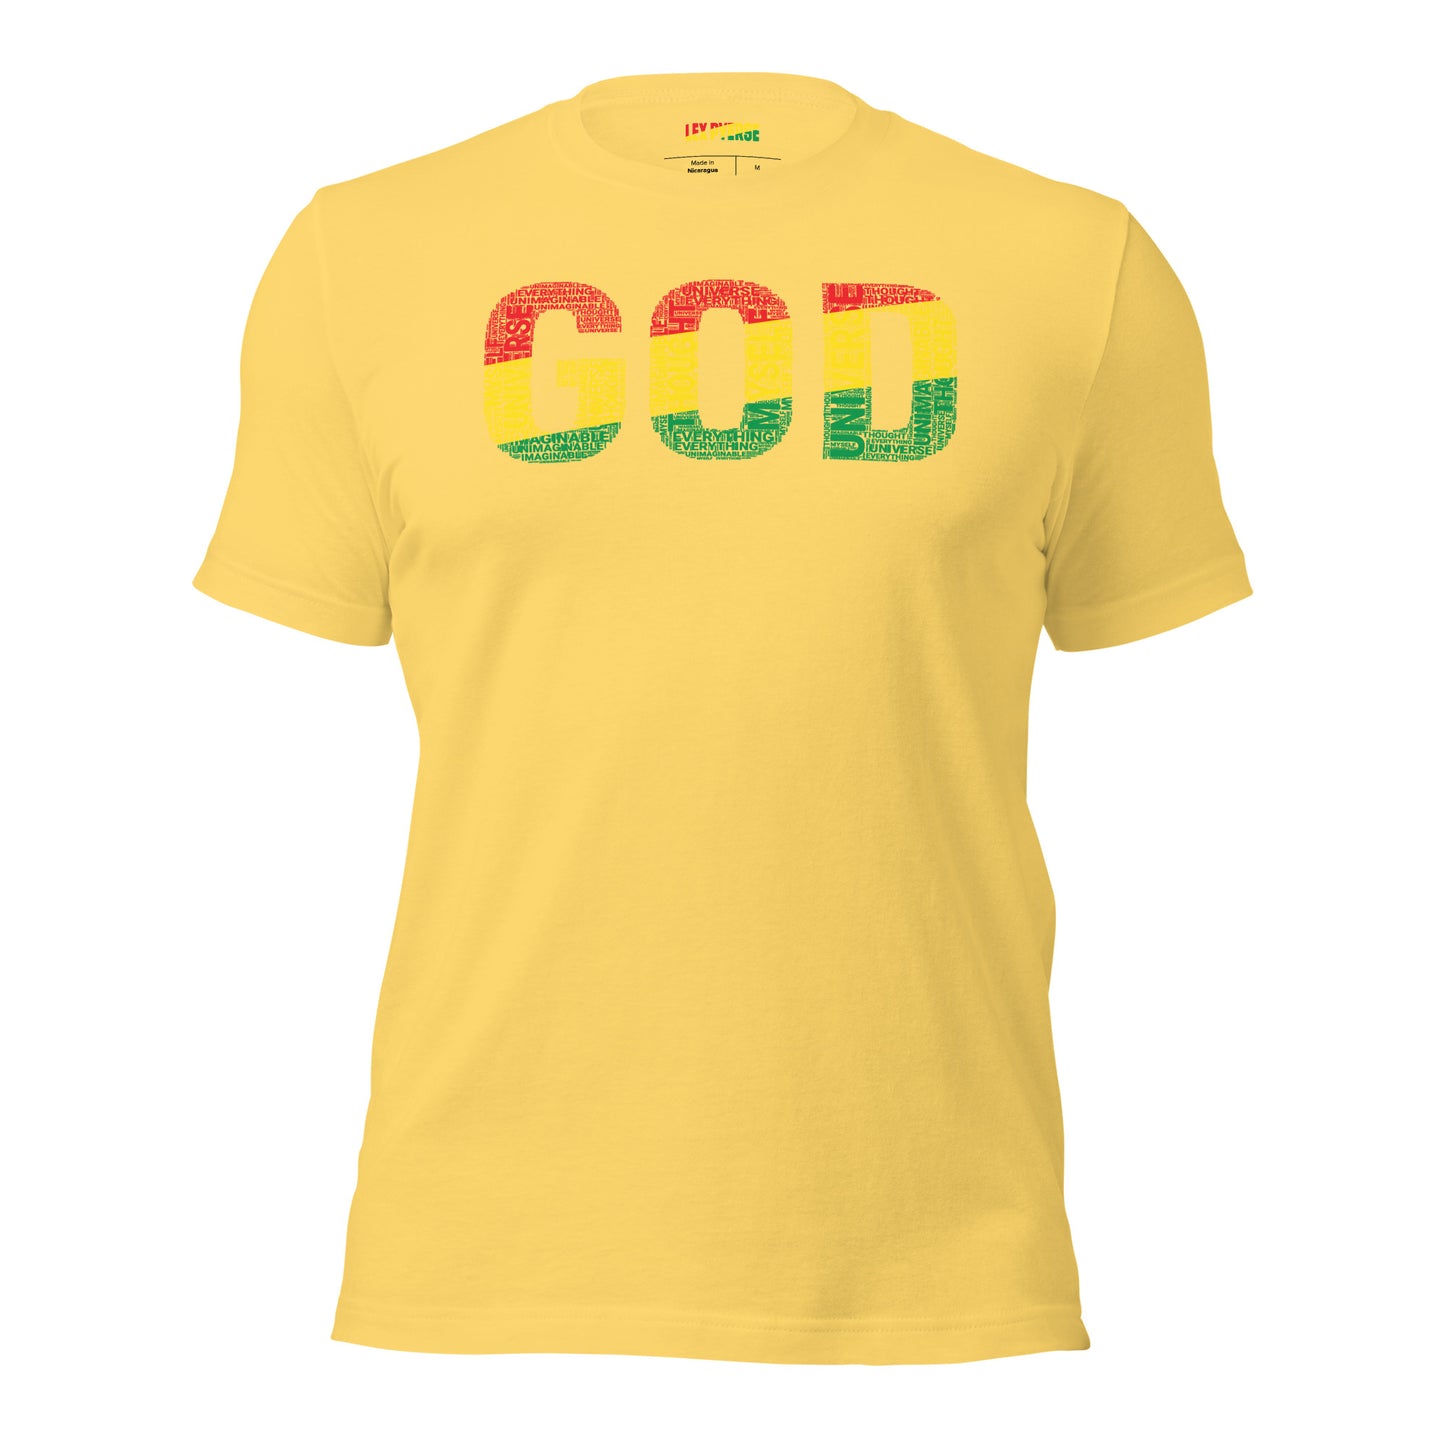 "GOD"  Pan-African Colored Word Cluster Short-Sleeve Unisex T-Shirt